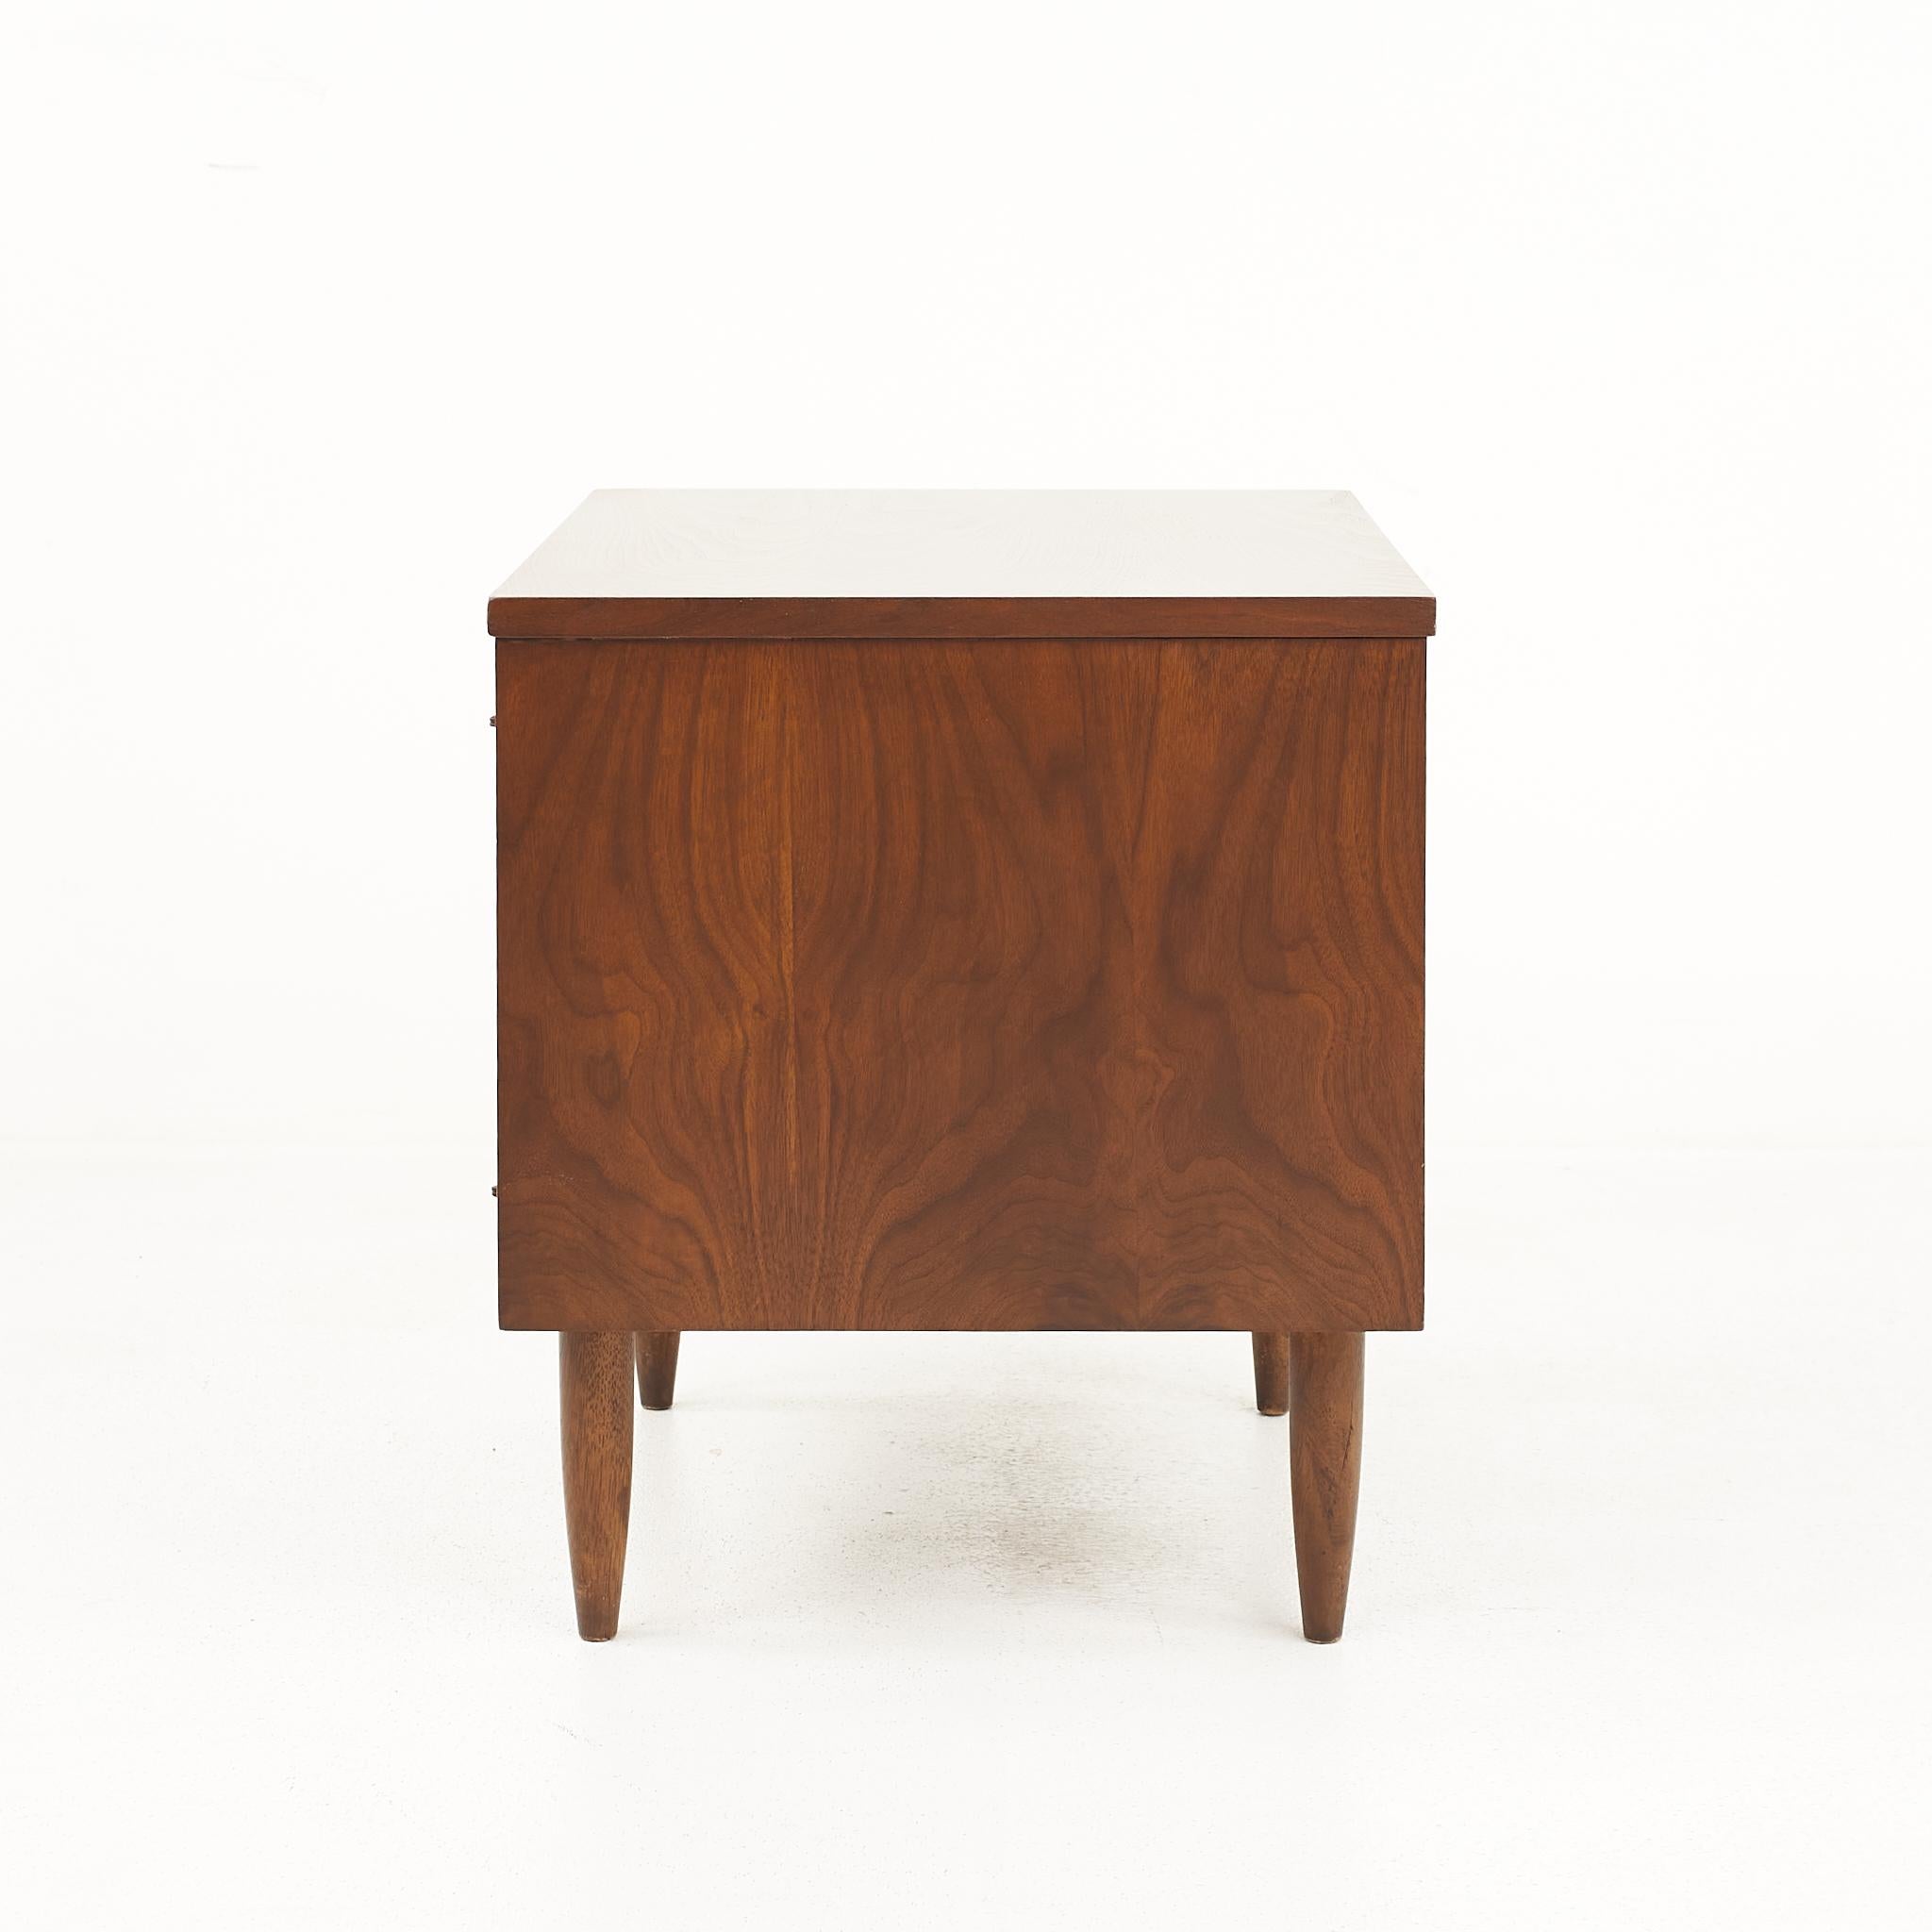 Late 20th Century Broyhill Sculptra Brutalist Mid-Century Walnut Commode Nightstands, a Pair For Sale